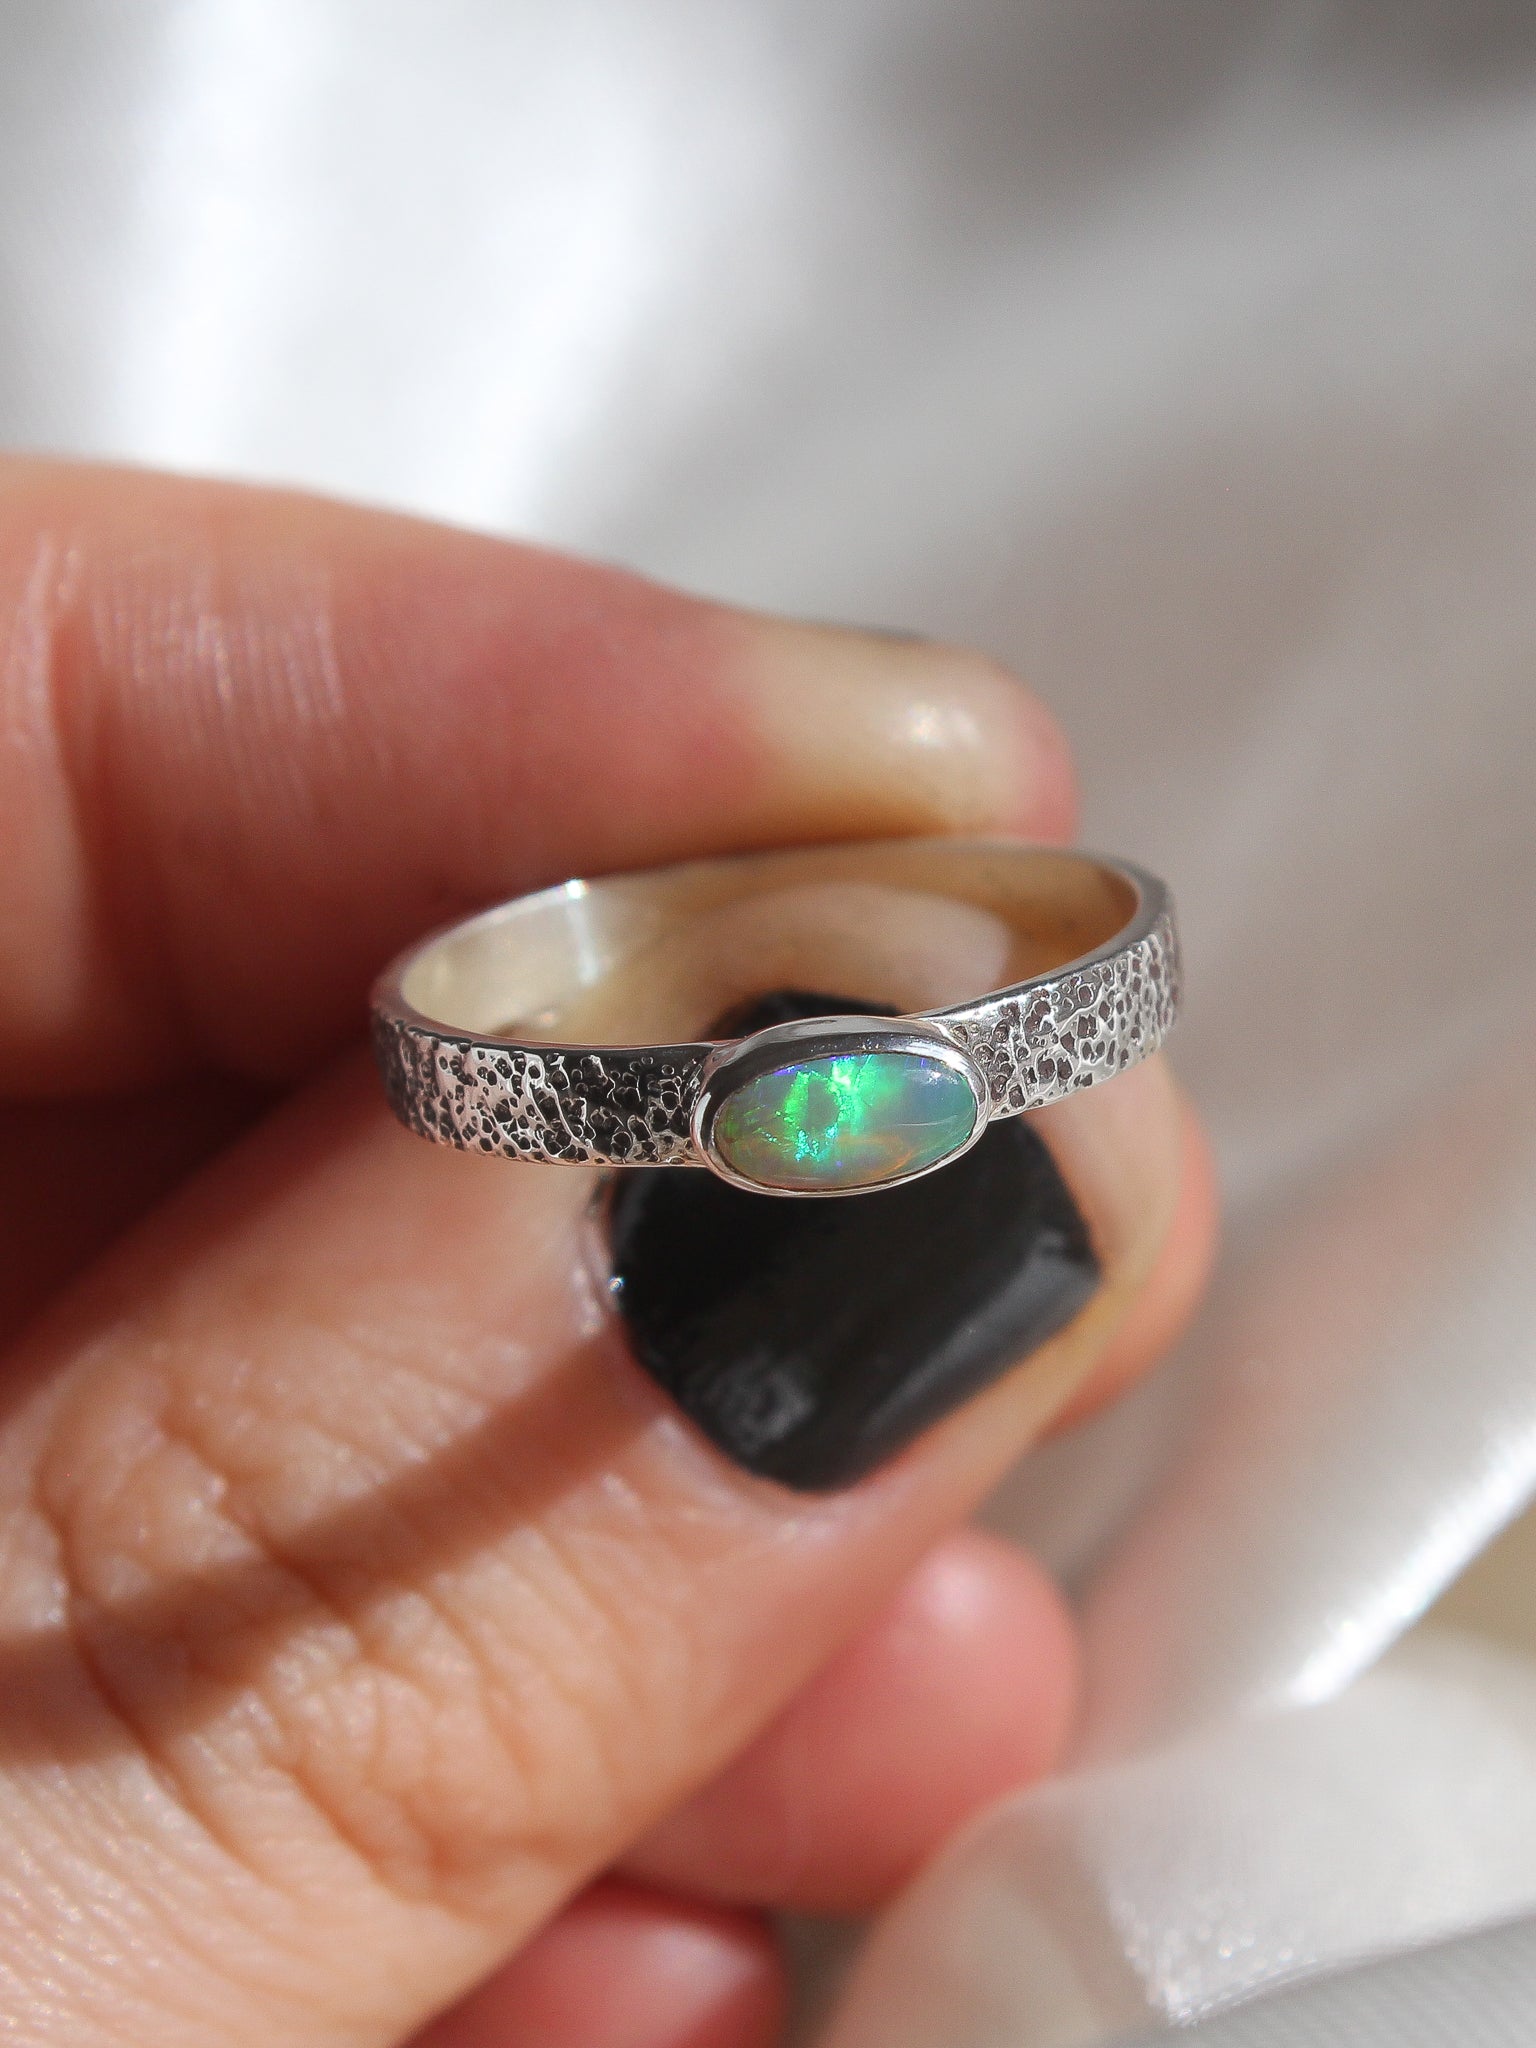 Handmade 925 sterling silver ring with Australian lightning ridge stone on a textured band size 8